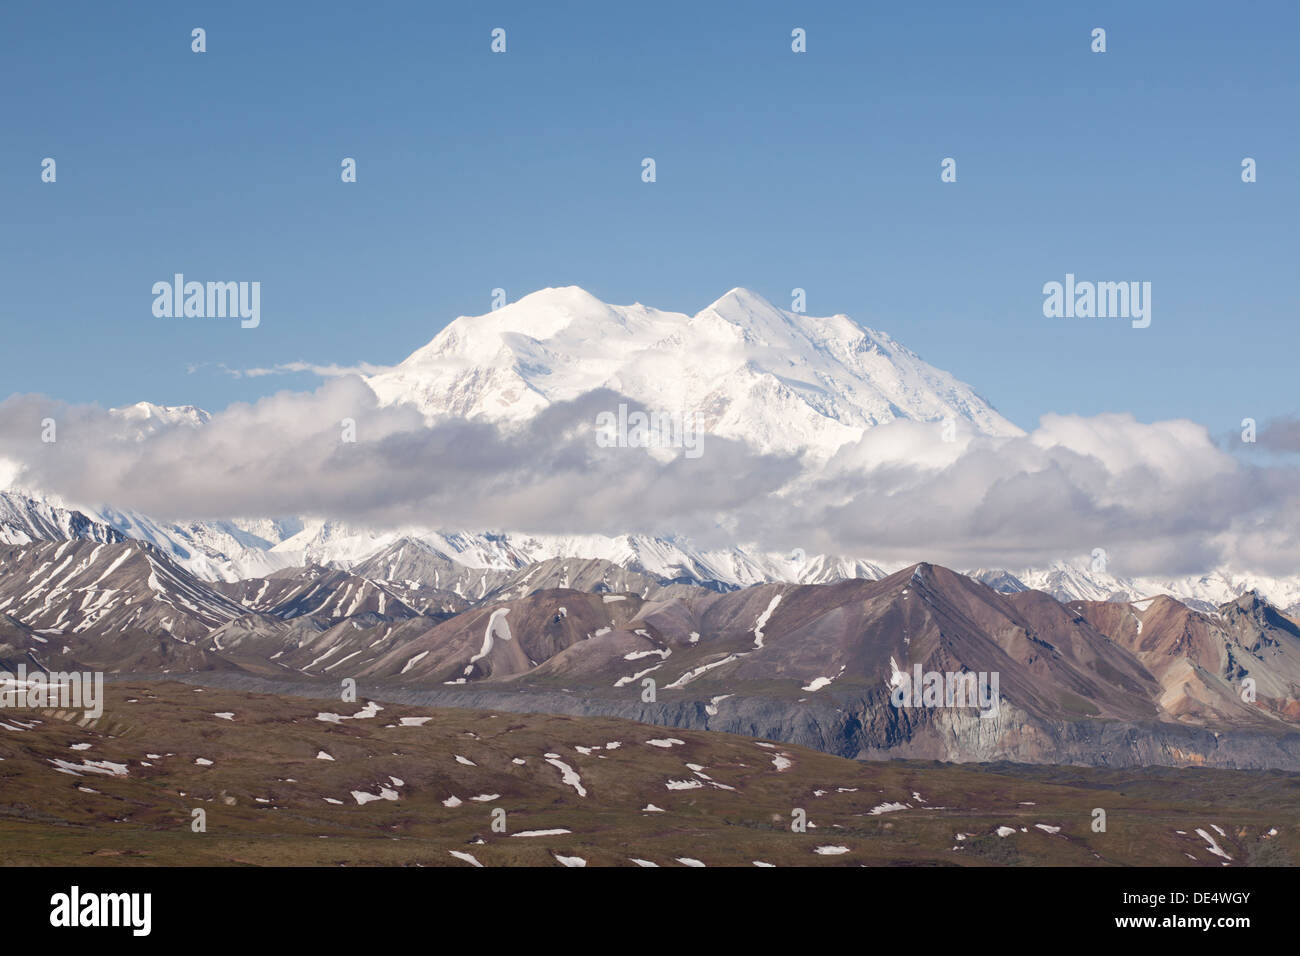 View of McKinley or Denali mount from Eielson Visitor Center, Denali National Park and Preserve, Alaska, U.S.A. Stock Photo